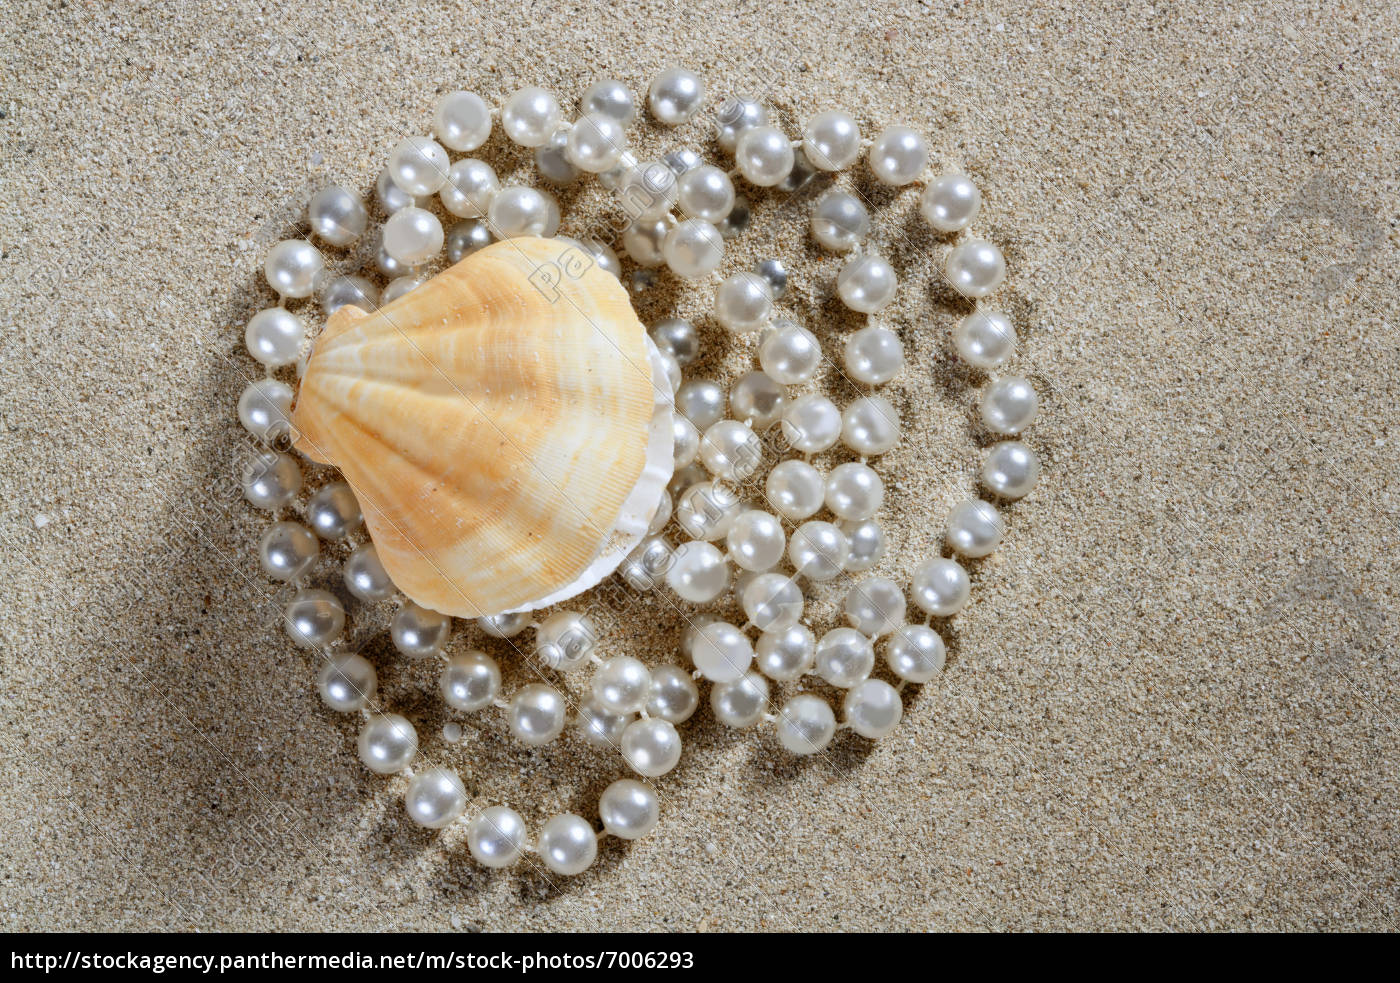 clam with pearls inside